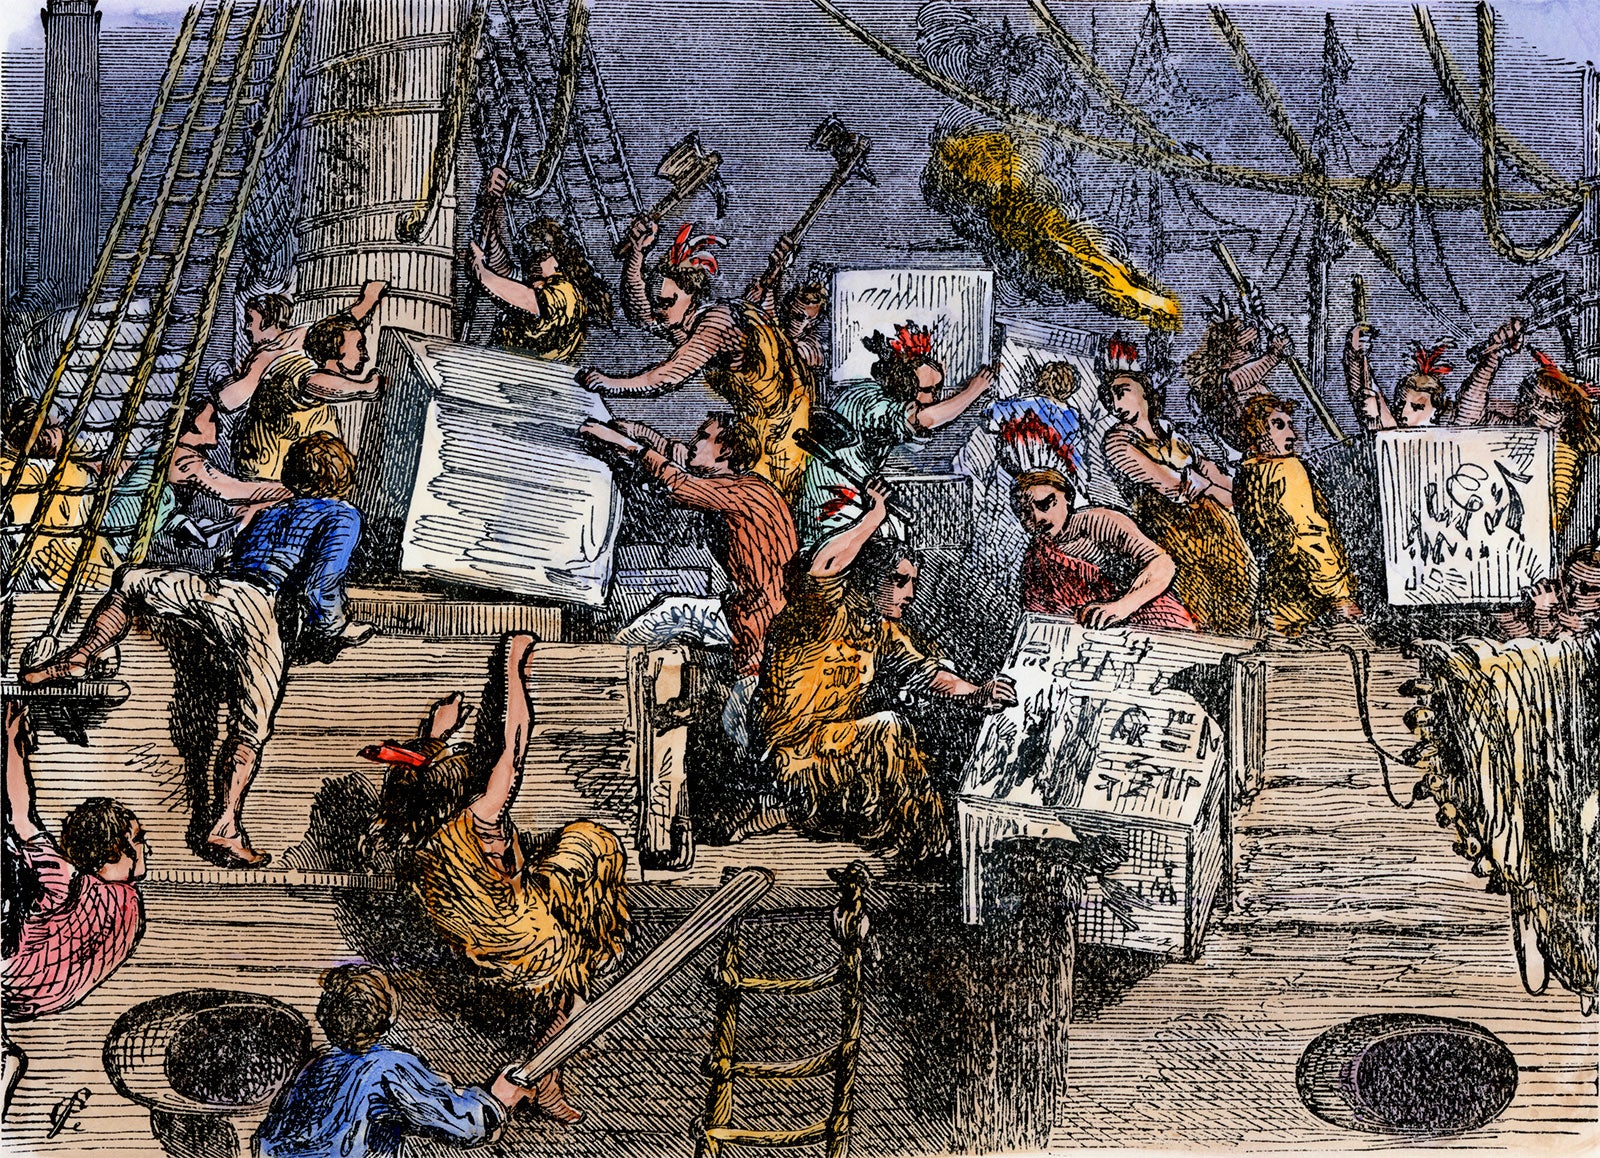 The Boston Tea Party and the ungrateful colonists